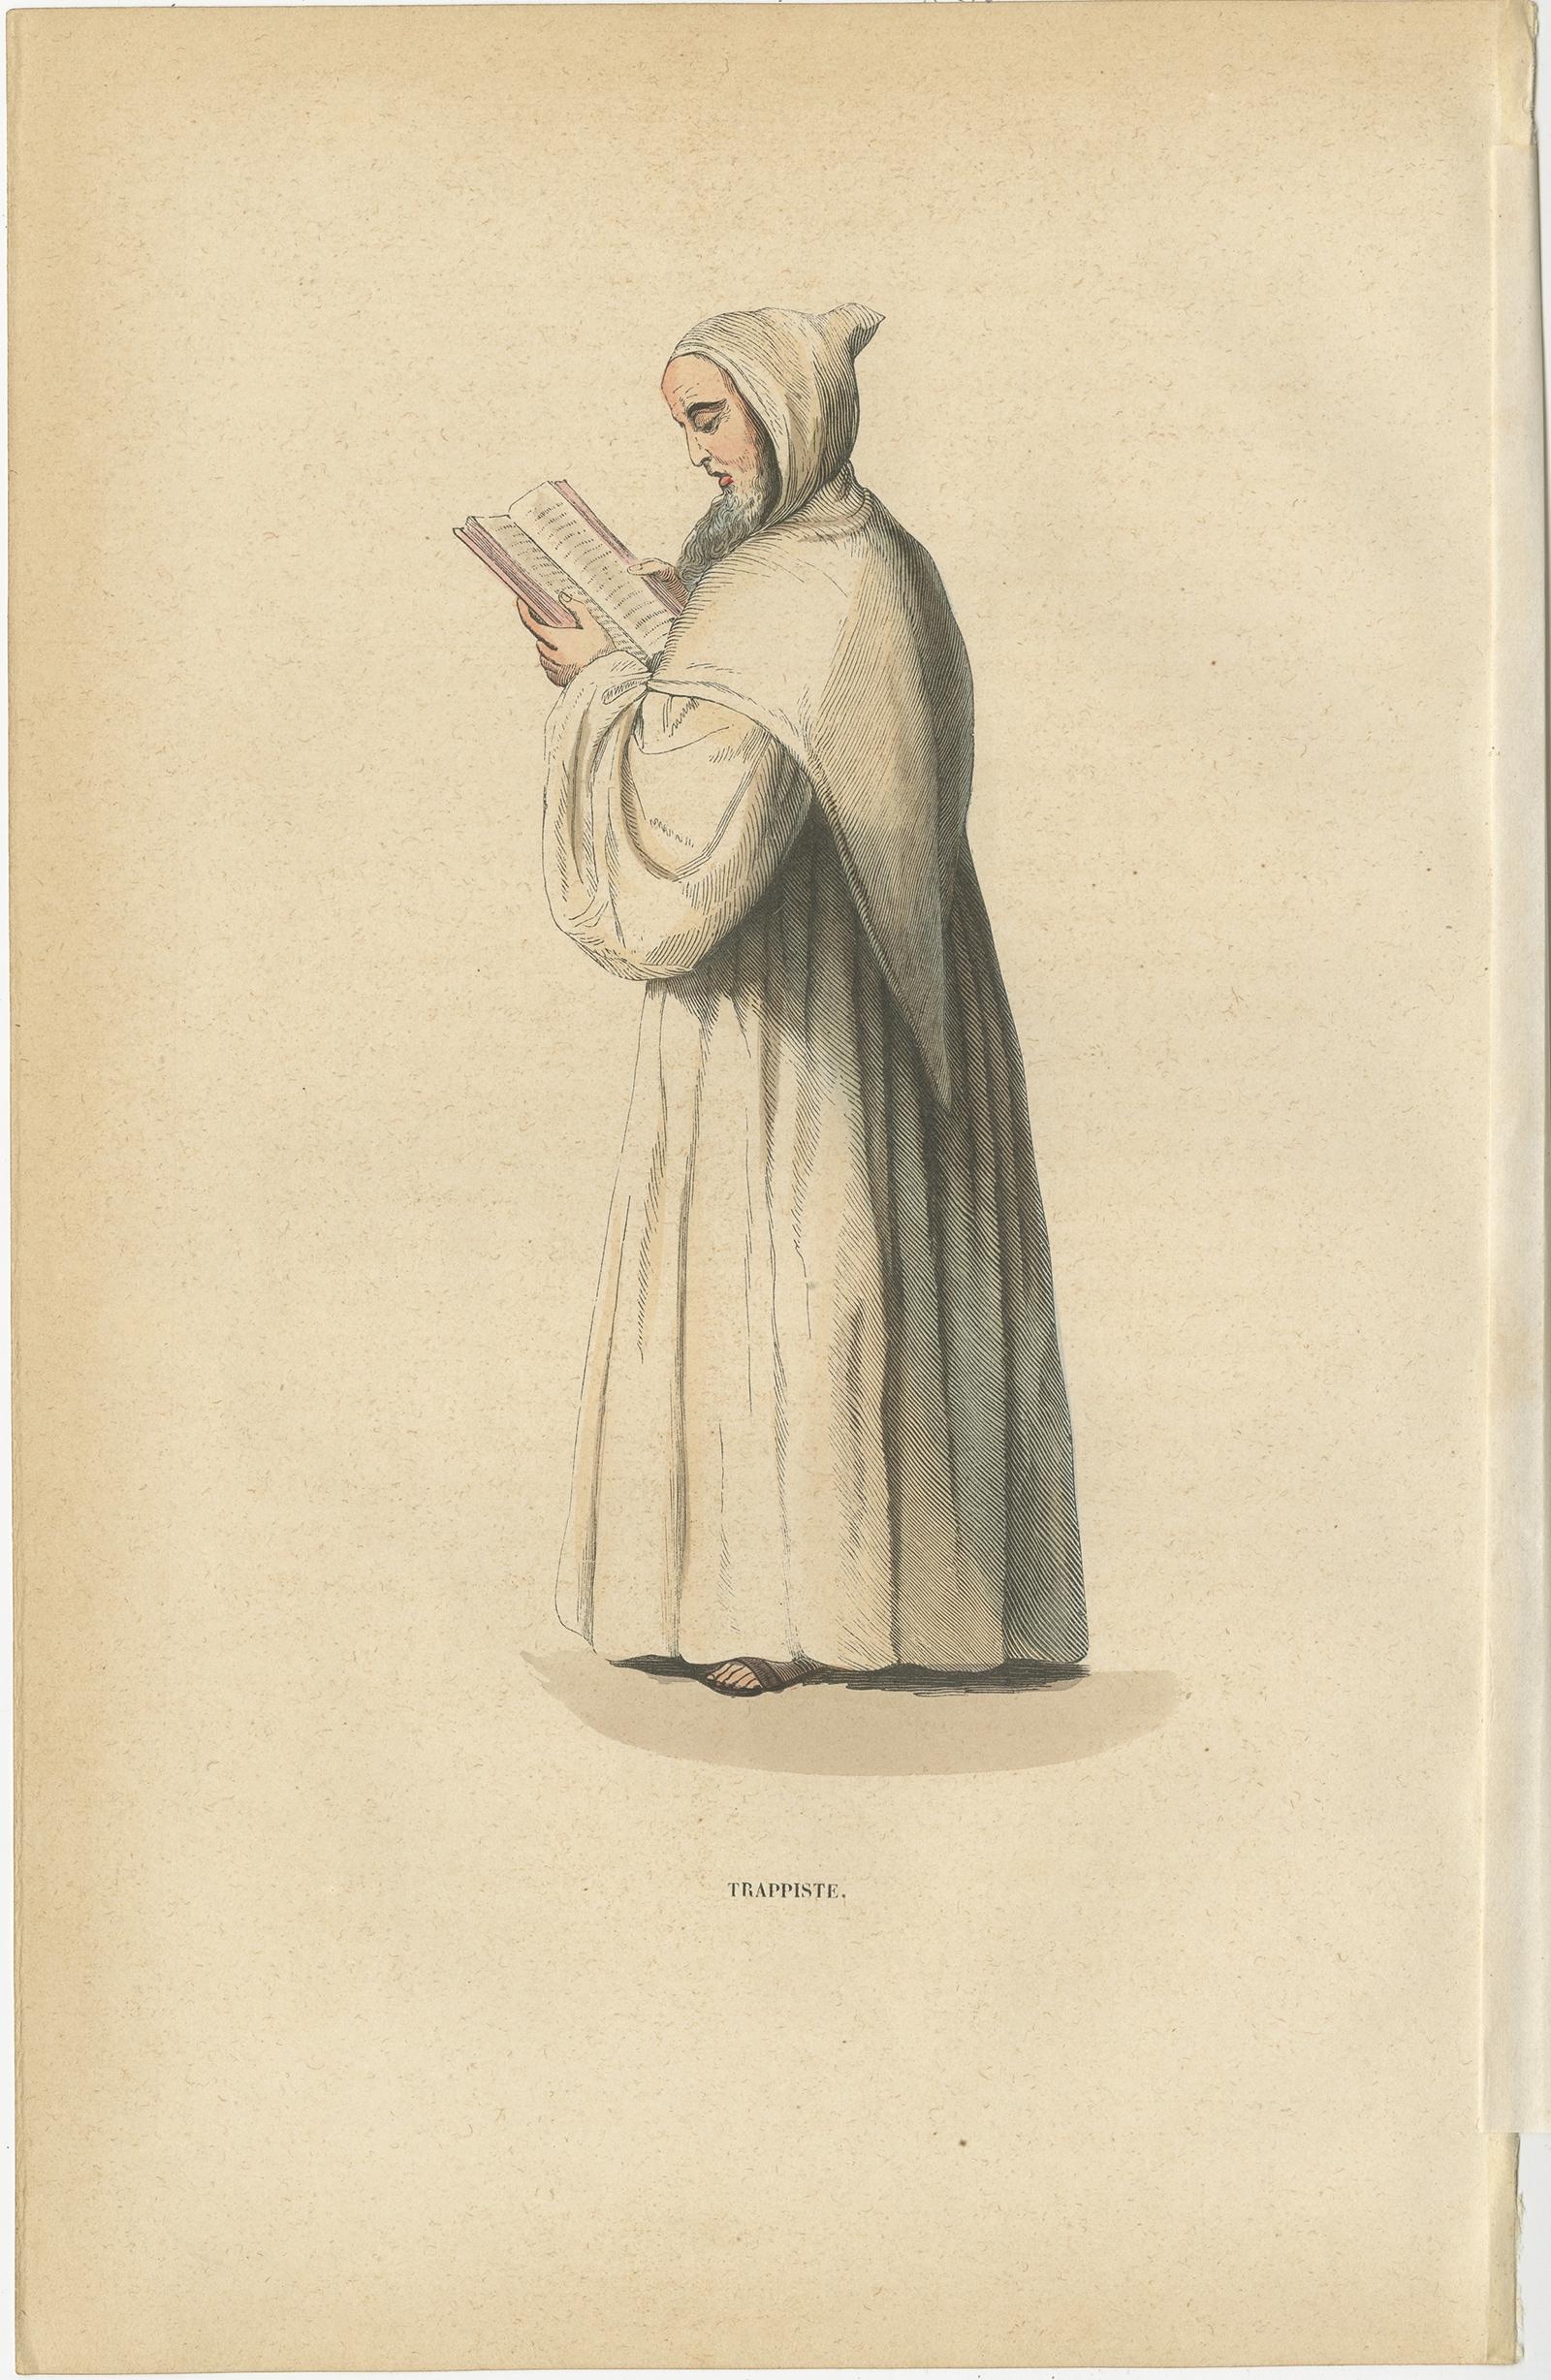 Antique print titled 'Trappiste'. 

Print of a Trappist Monk reading a Bible. This print originates from 'Histoire et Costumes des Ordres Religieux'.

The Trappists, officially known as the Order of Cistercians of the Strict Observance and